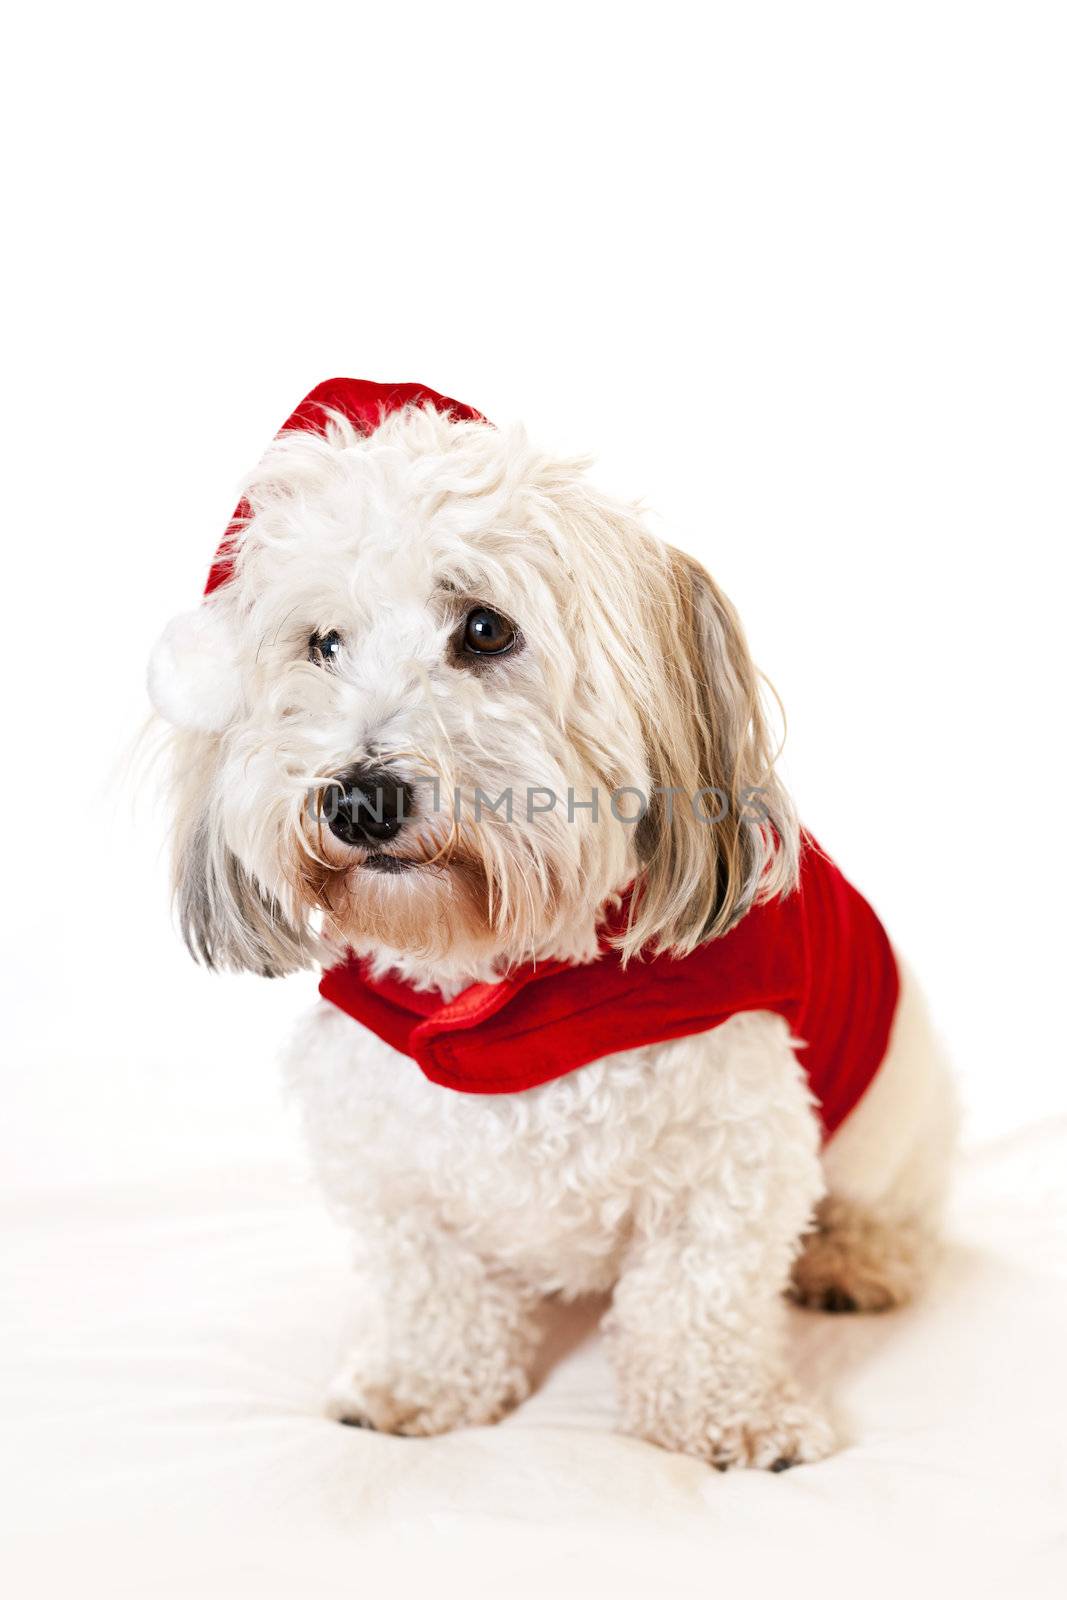 Cute dog in santa outfit by elenathewise